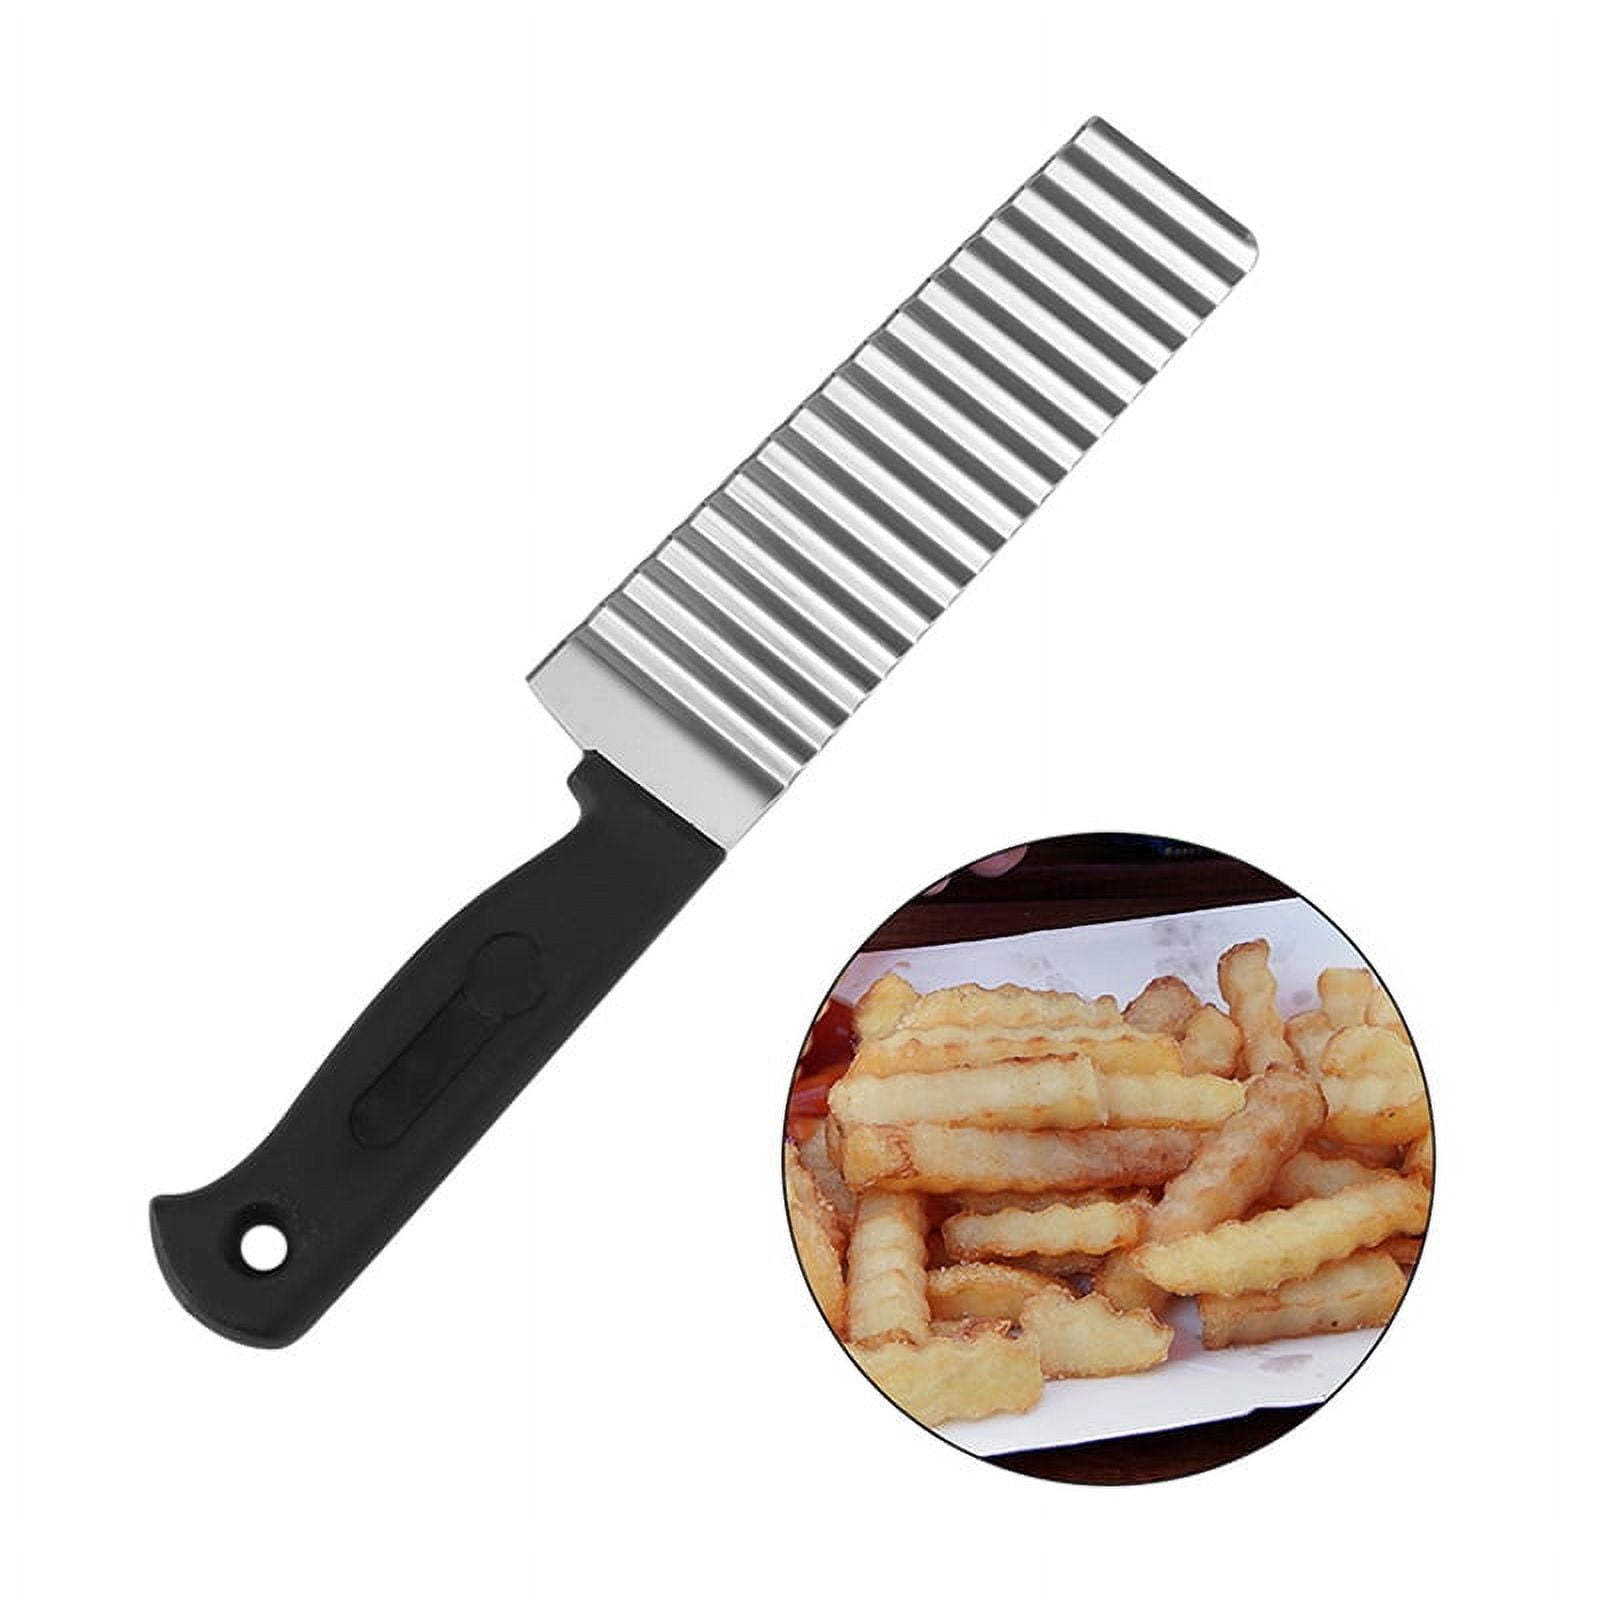 1pc Multi-functional French Fry Cutter Handheld Potato Slicer For Home Use